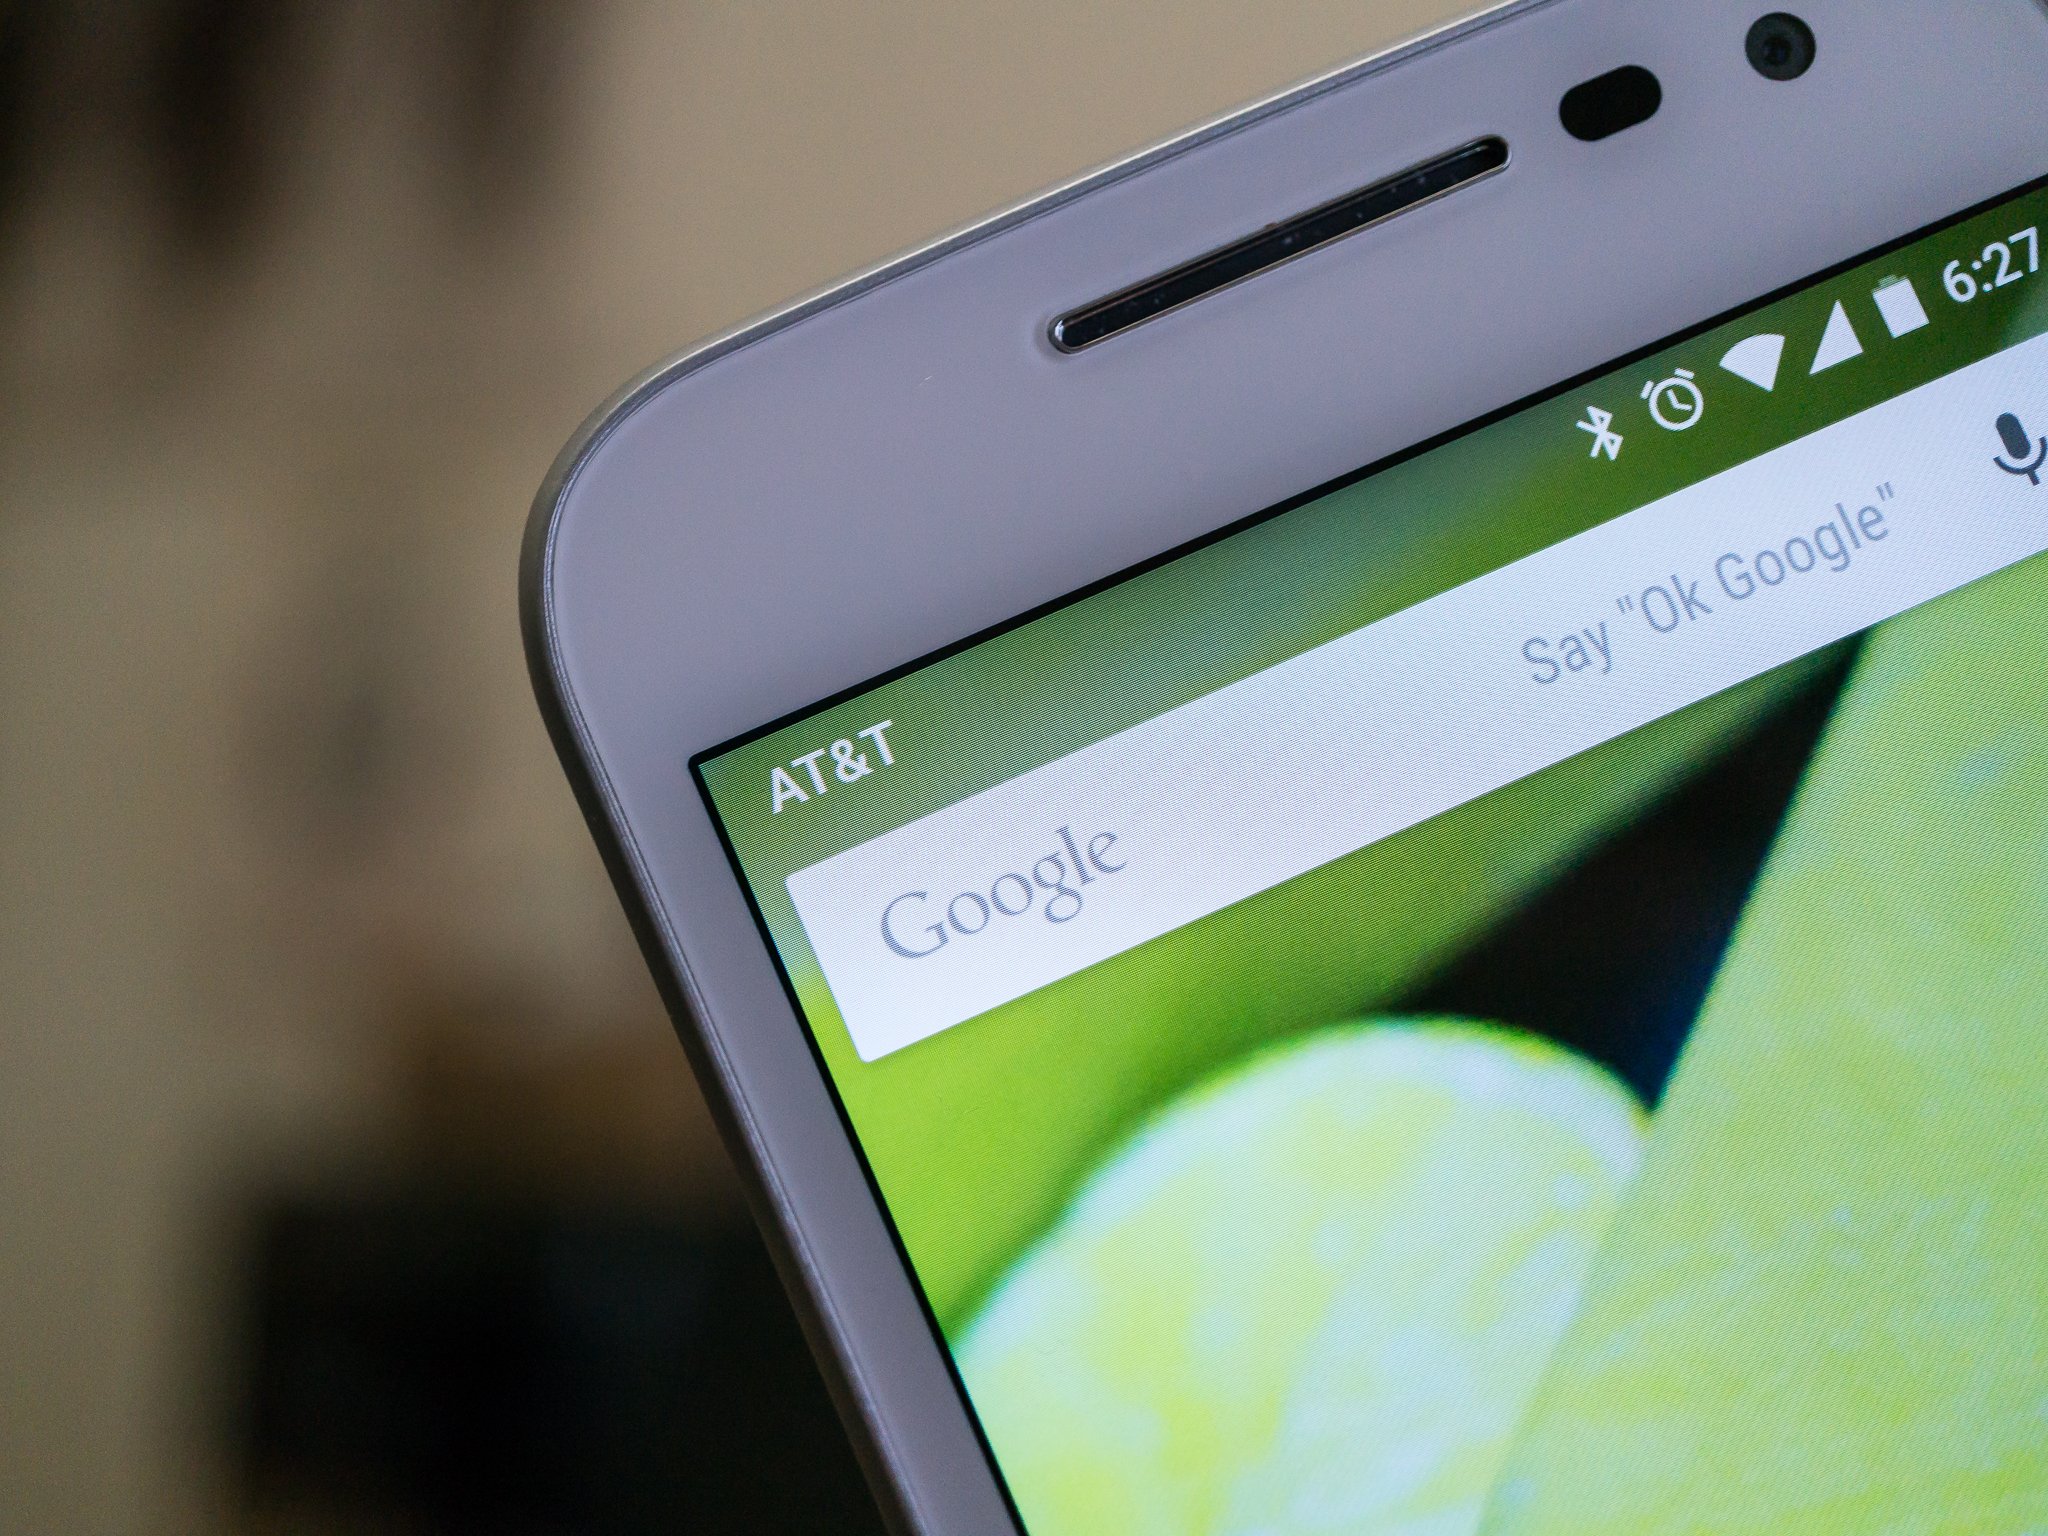 How to remove the network name from the Moto G status bar